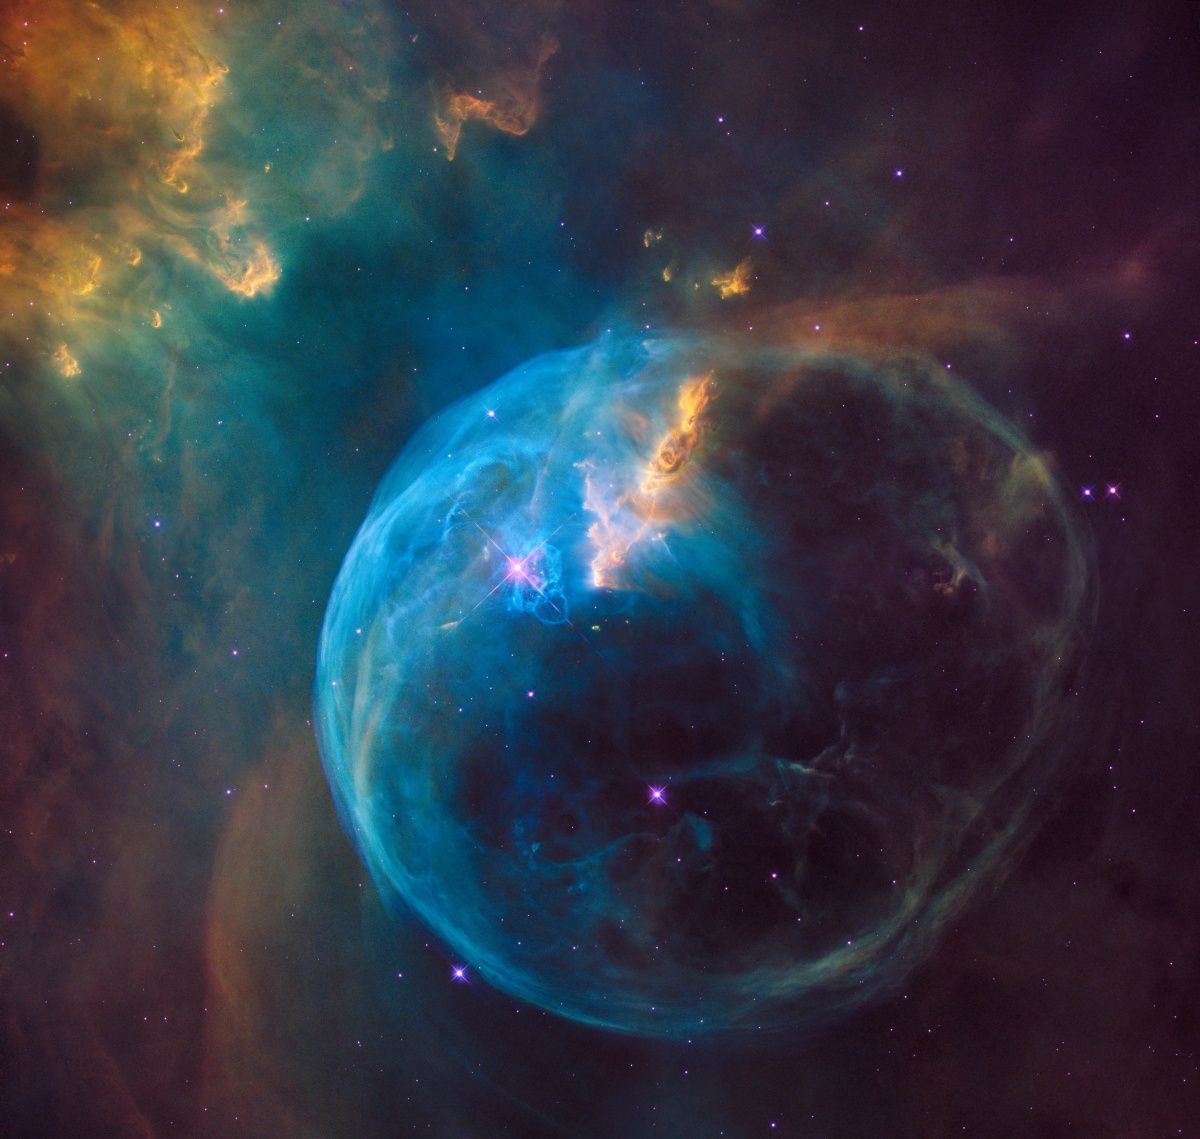 Image of the Bubble Nebula, Three Line Tale prompt for flash fiction